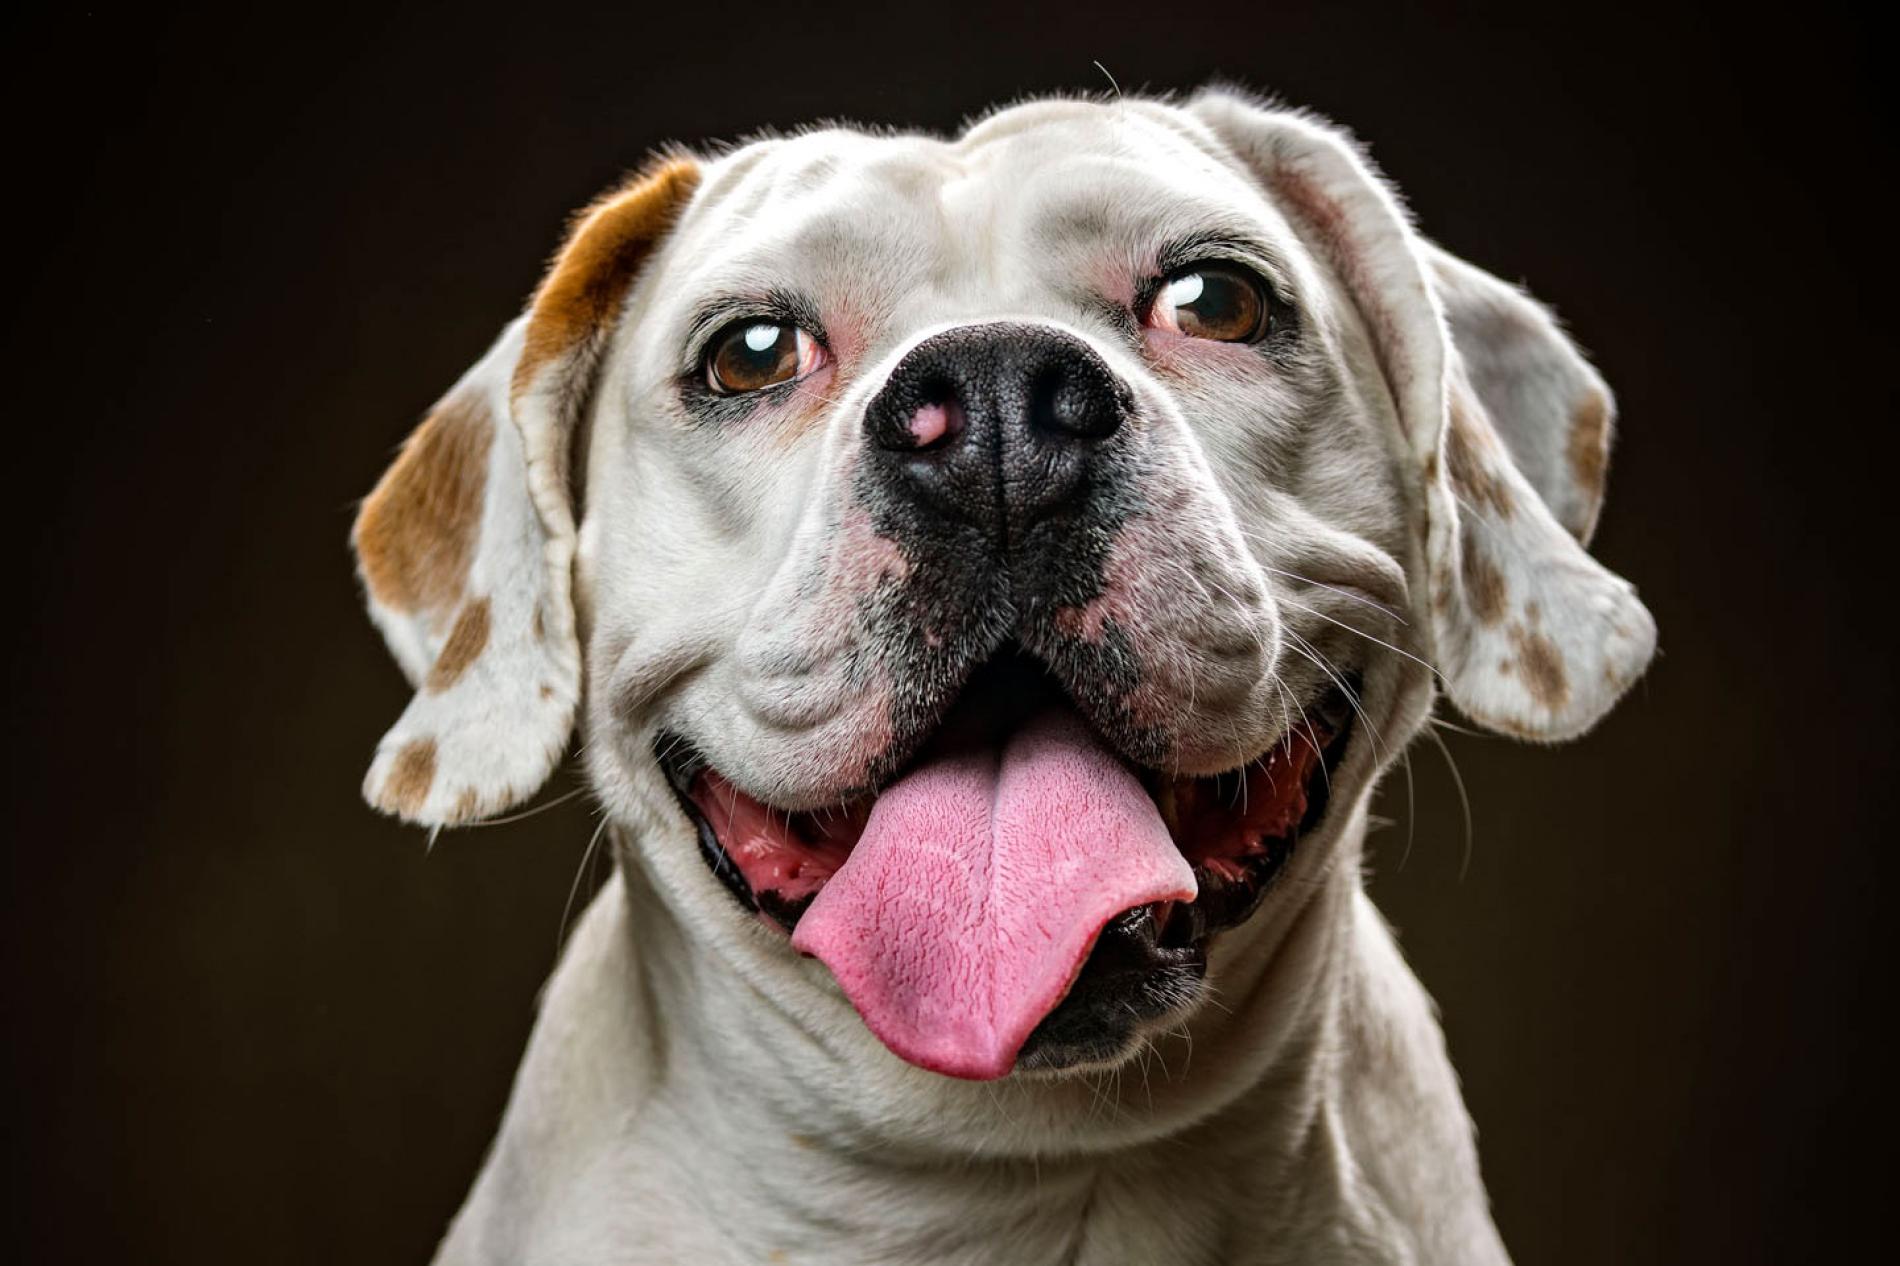 Pictures of Dogs Show Funny Faces, Inner Charisma